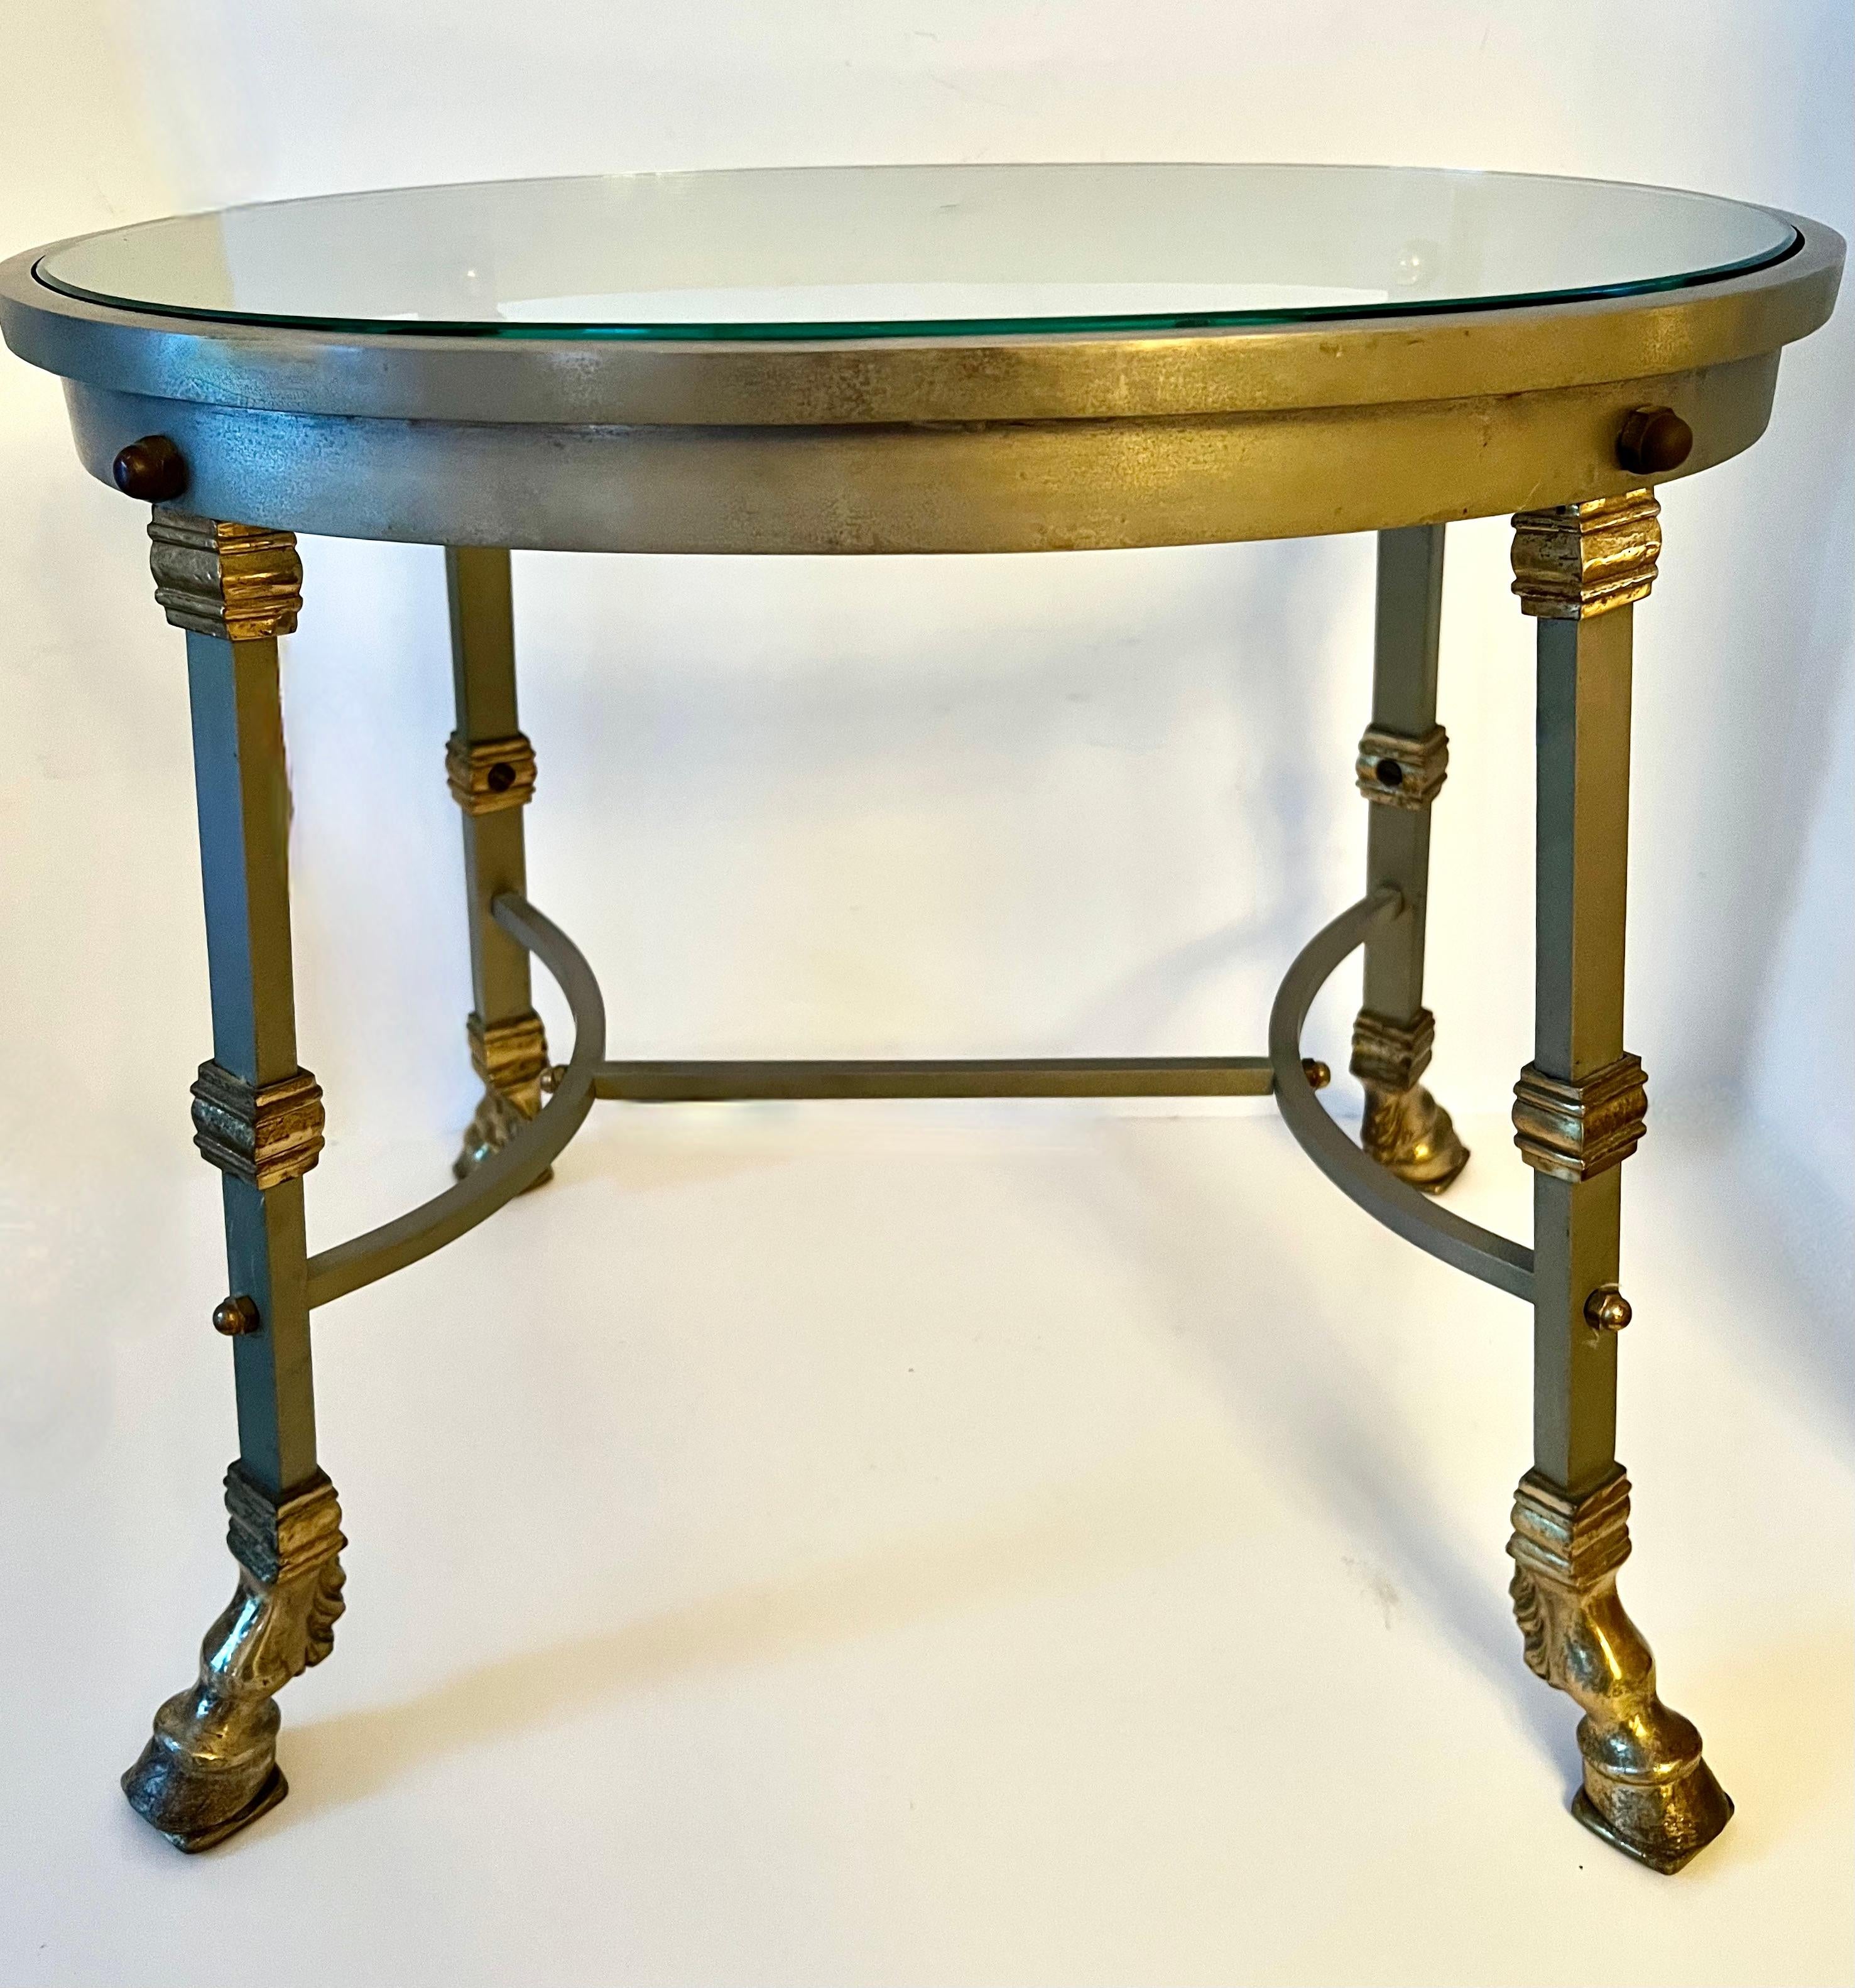 Maison Jansen Steel, brass and bronze glass top table.  This table is so good!   The design is thoughtful and architectural - a handsome addition to any space.  the brass fittings and bronze hoof feet are truly spectacular.

A beautifully decorative